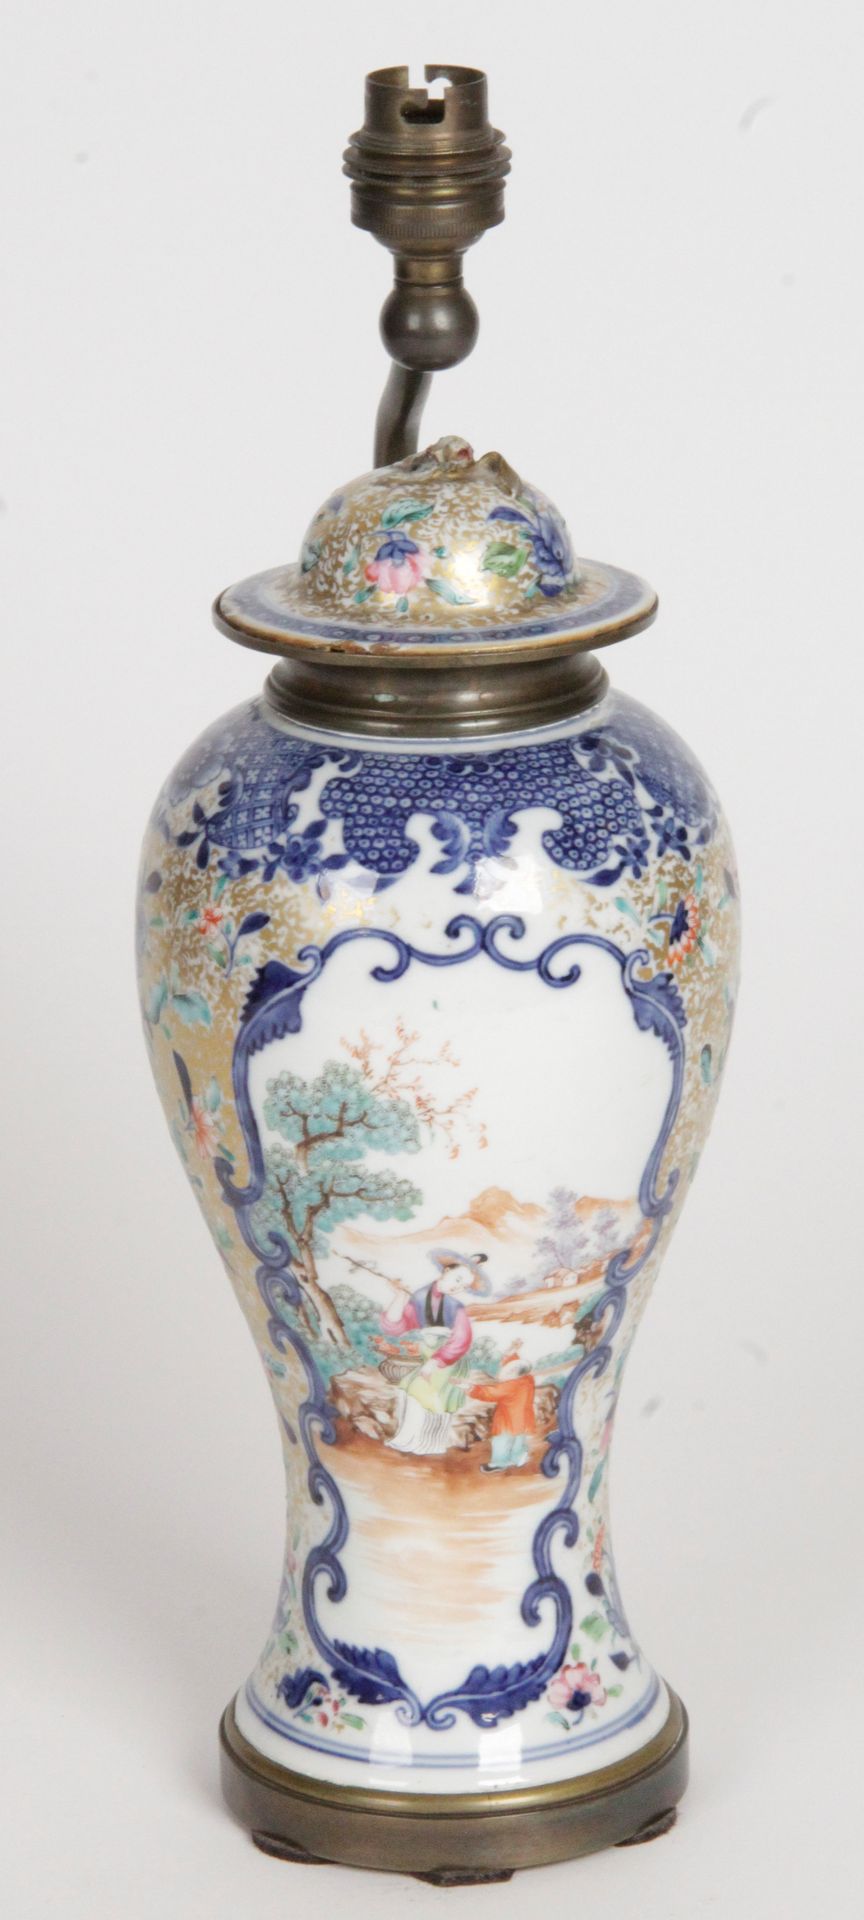 Null China, India Company, 18th century. Small covered porcelain vase, decorated&hellip;